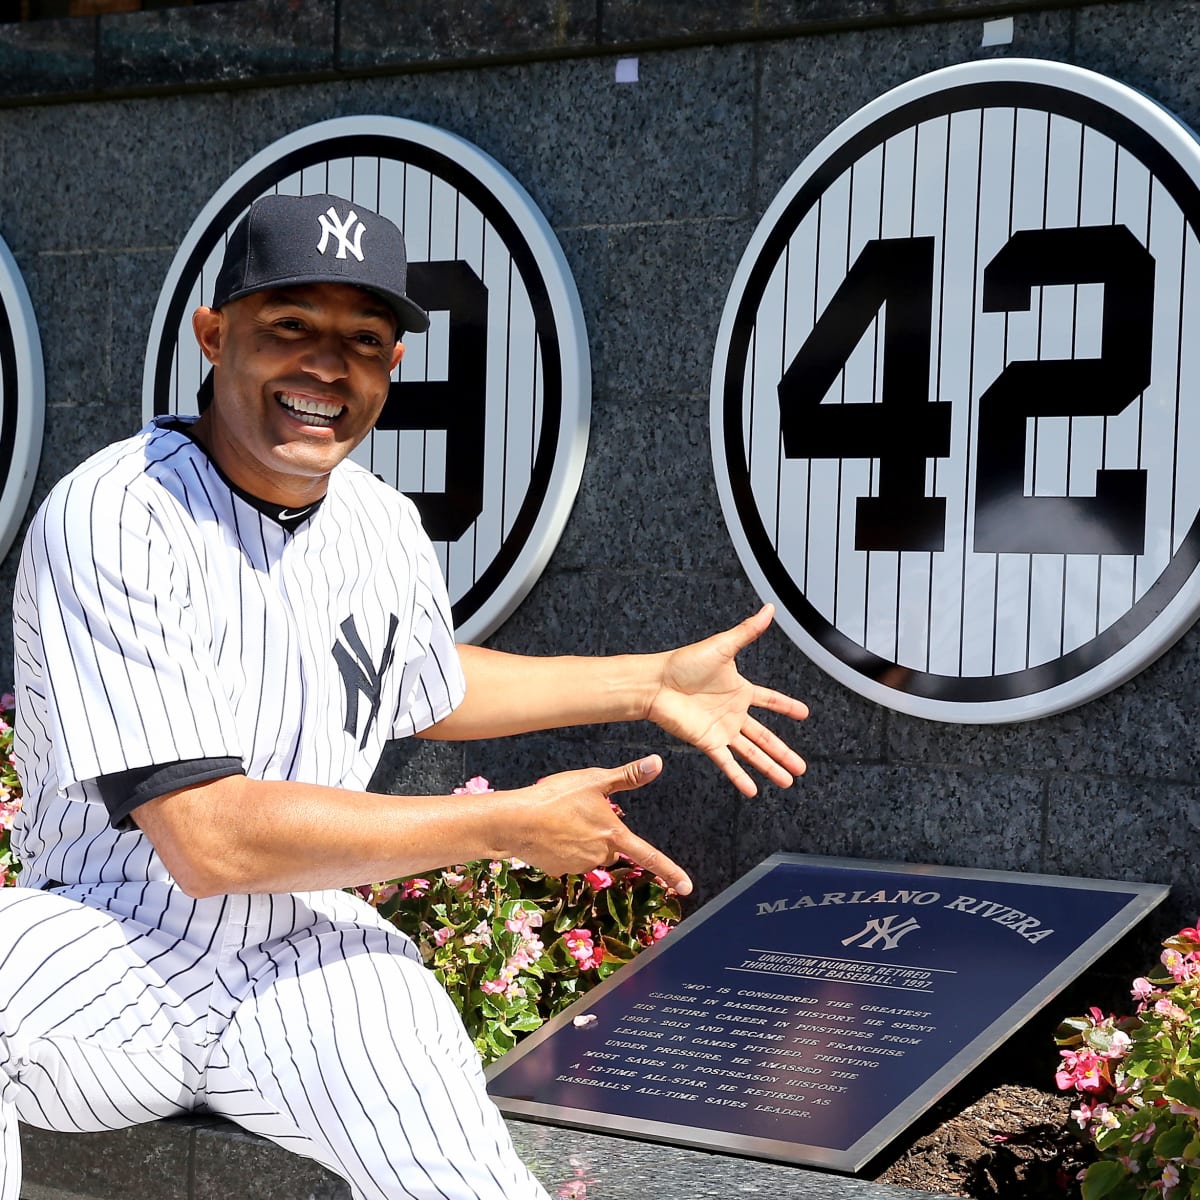 The 50 Greatest Players in New York Yankees History